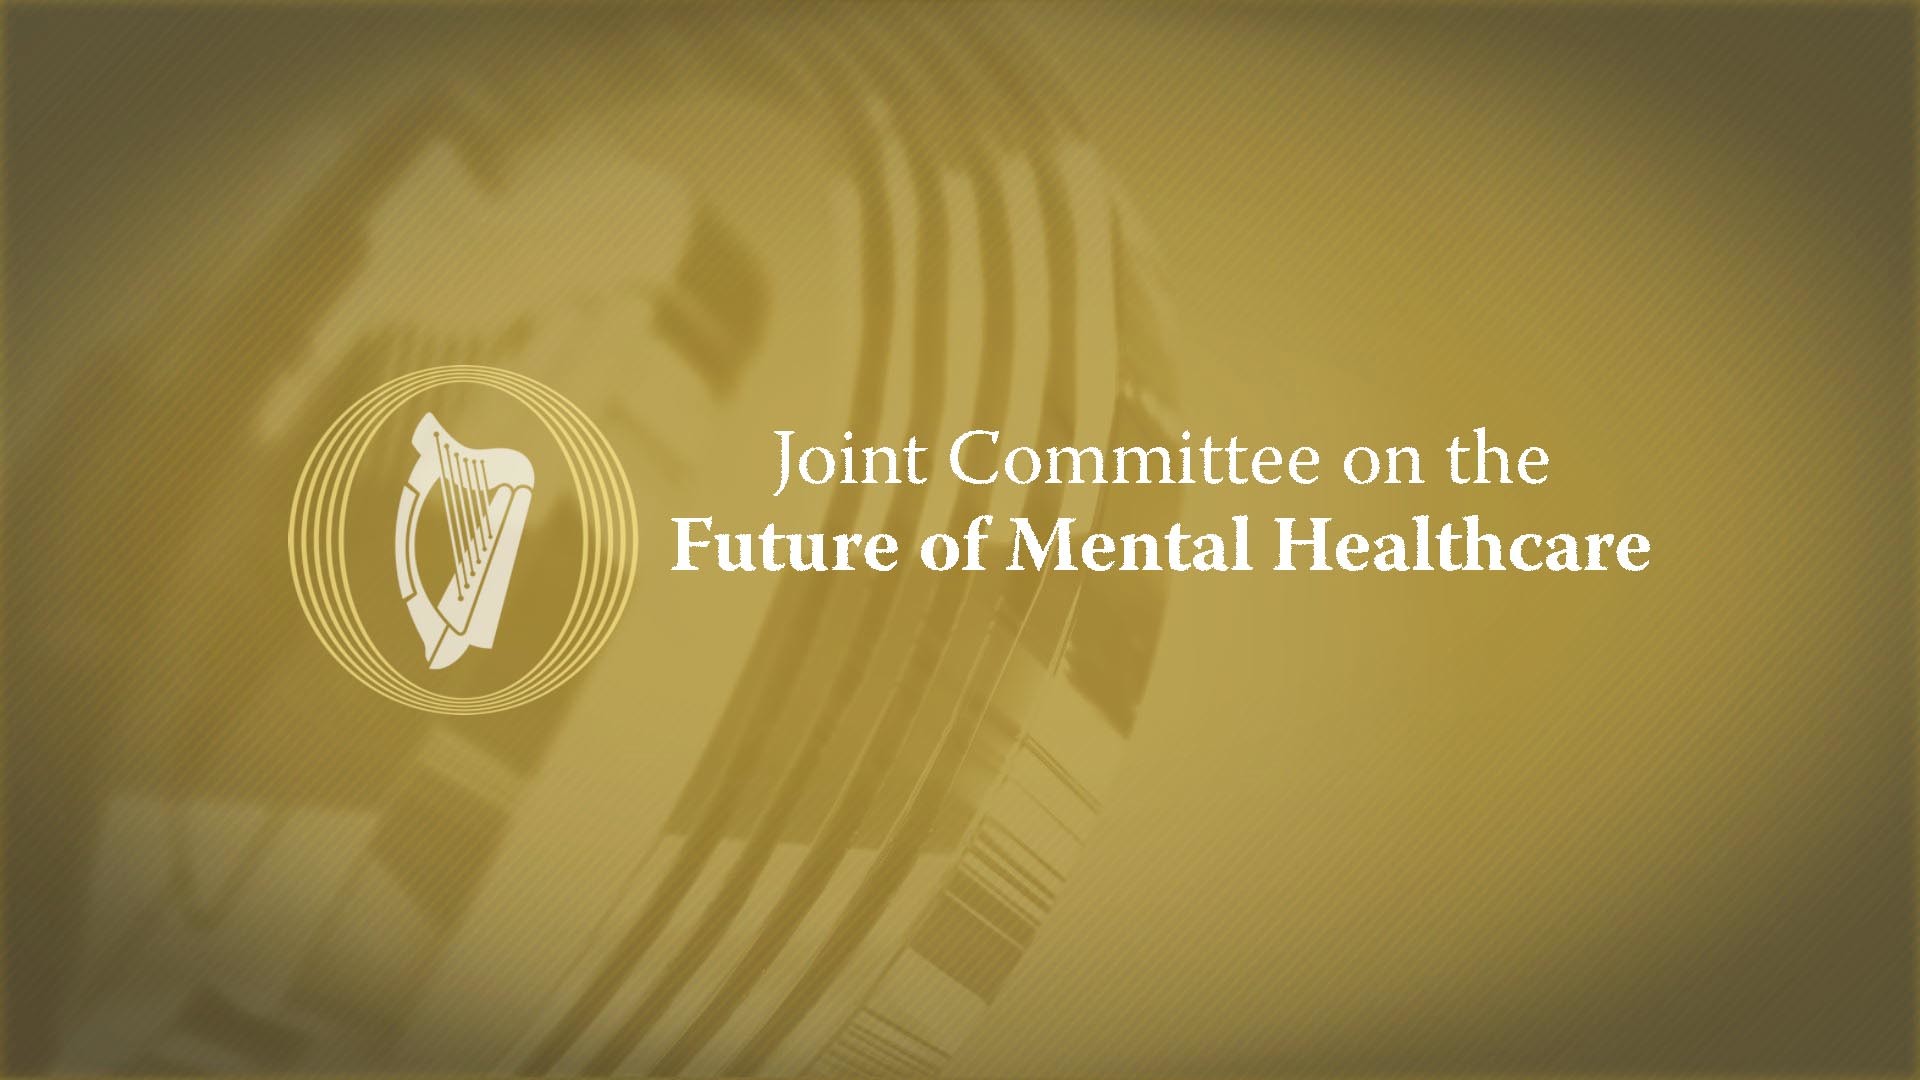 1920x1080 Wed, 11 Jul 2018 - Committee on Future of Mental Health Care